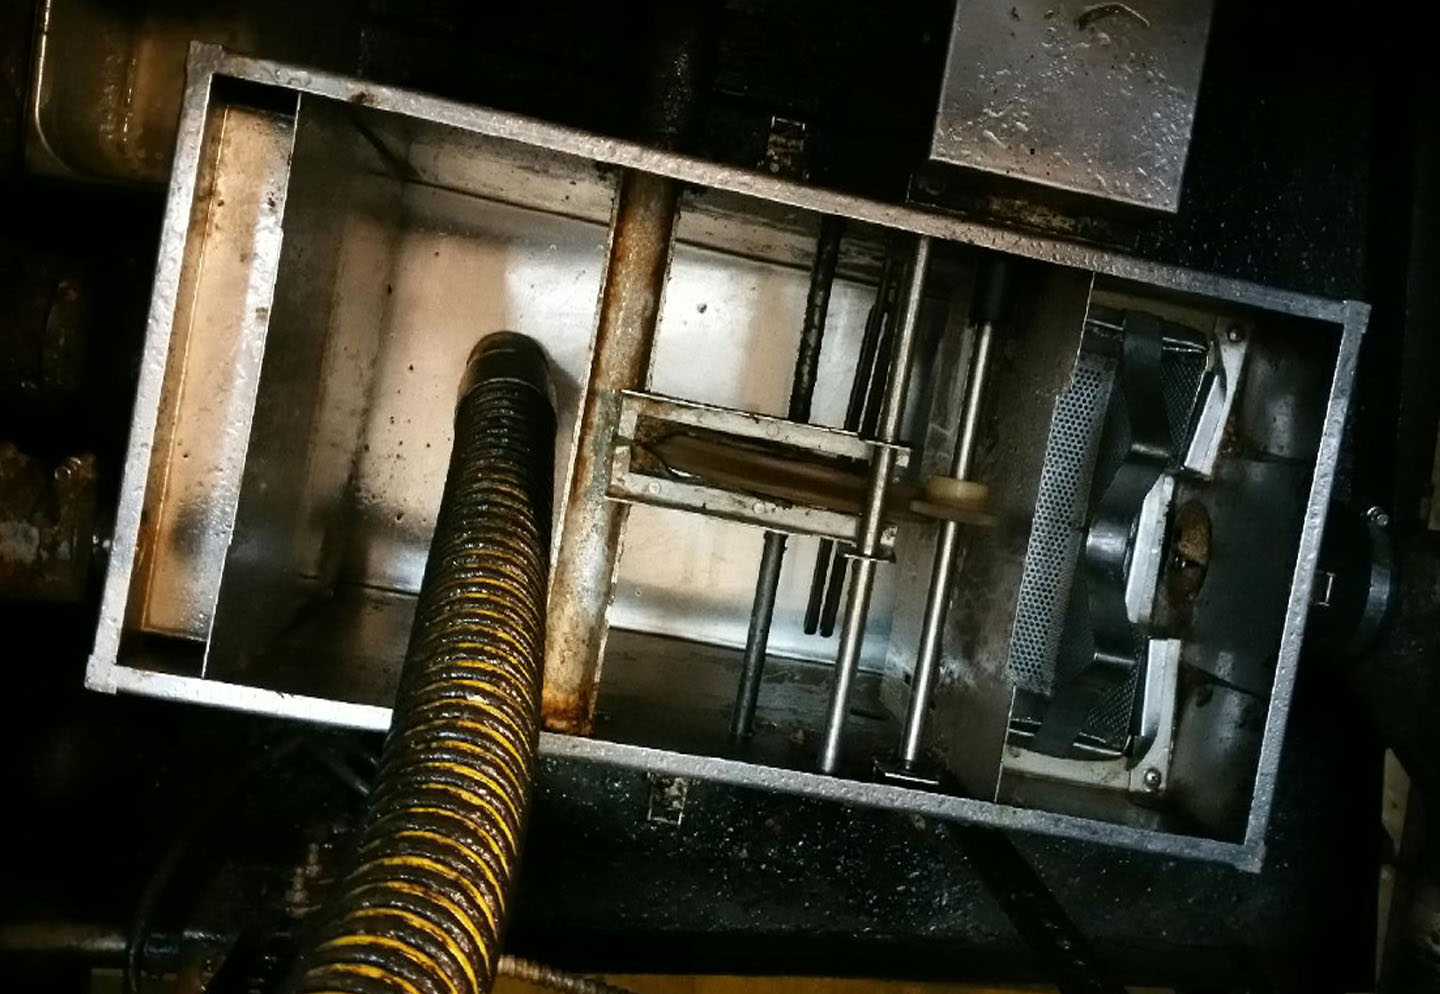 Grease Trap Pumping and Cleaning Service Company. Complete Removal of All FOGS (FATS, OILS, GREASE, and SOLIDs) Waste Preventing it From Entering The City Sanitation Line. Grease trap maintenance can prevent any problems such as backups and overflow.  